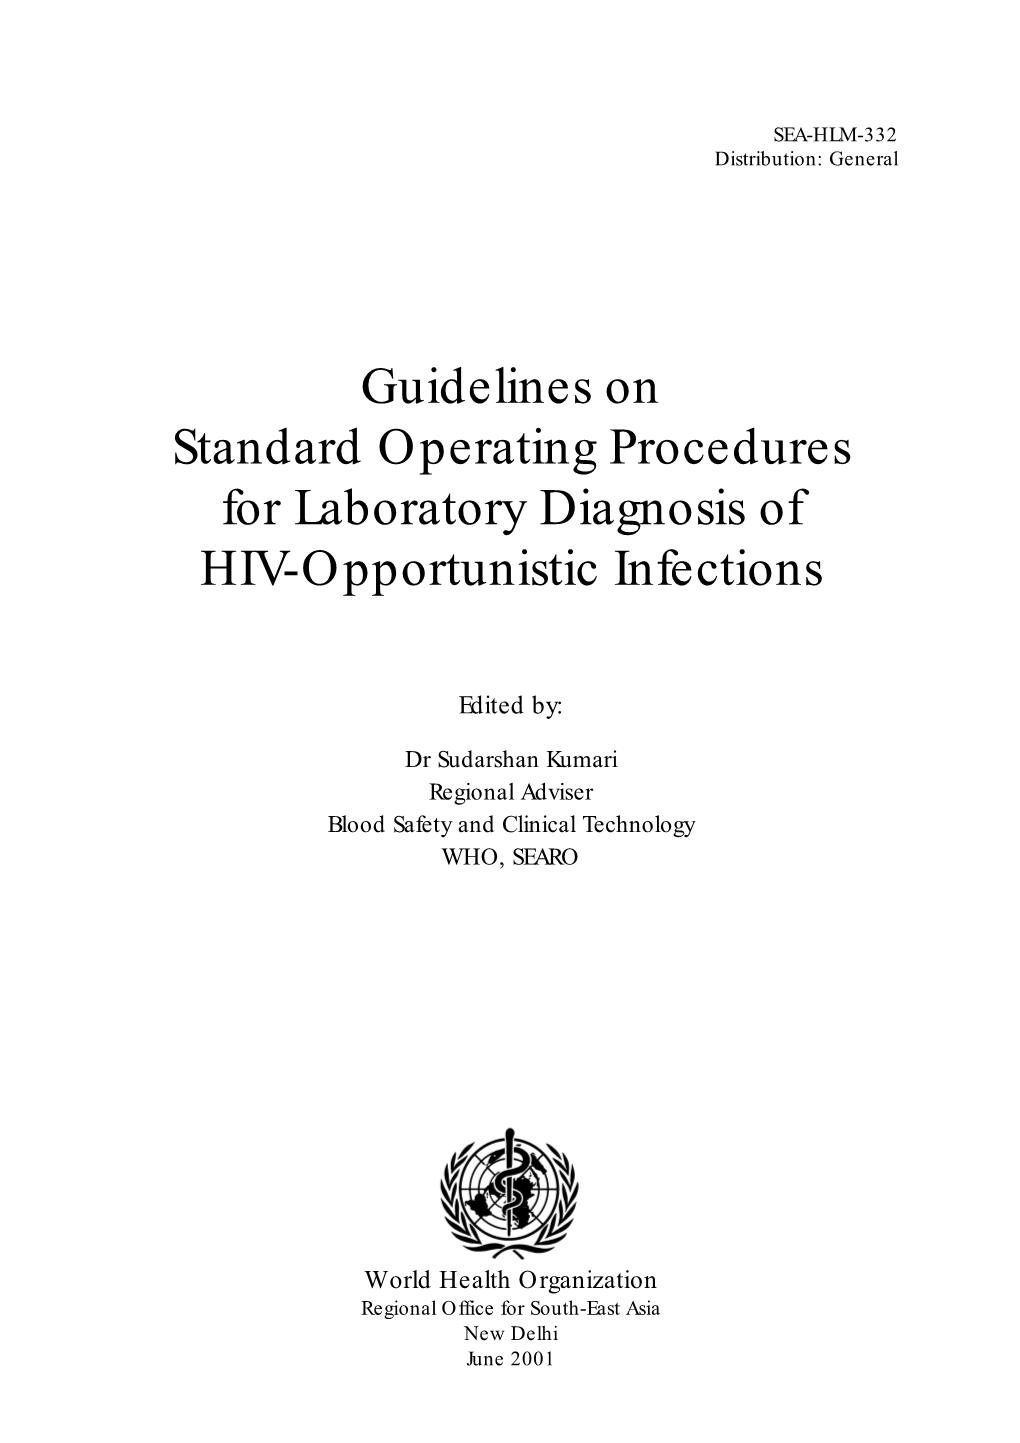 Guidelines on Standard Operating Procedures for Laboratory Diagnosis of HIV-Opportunistic Infections